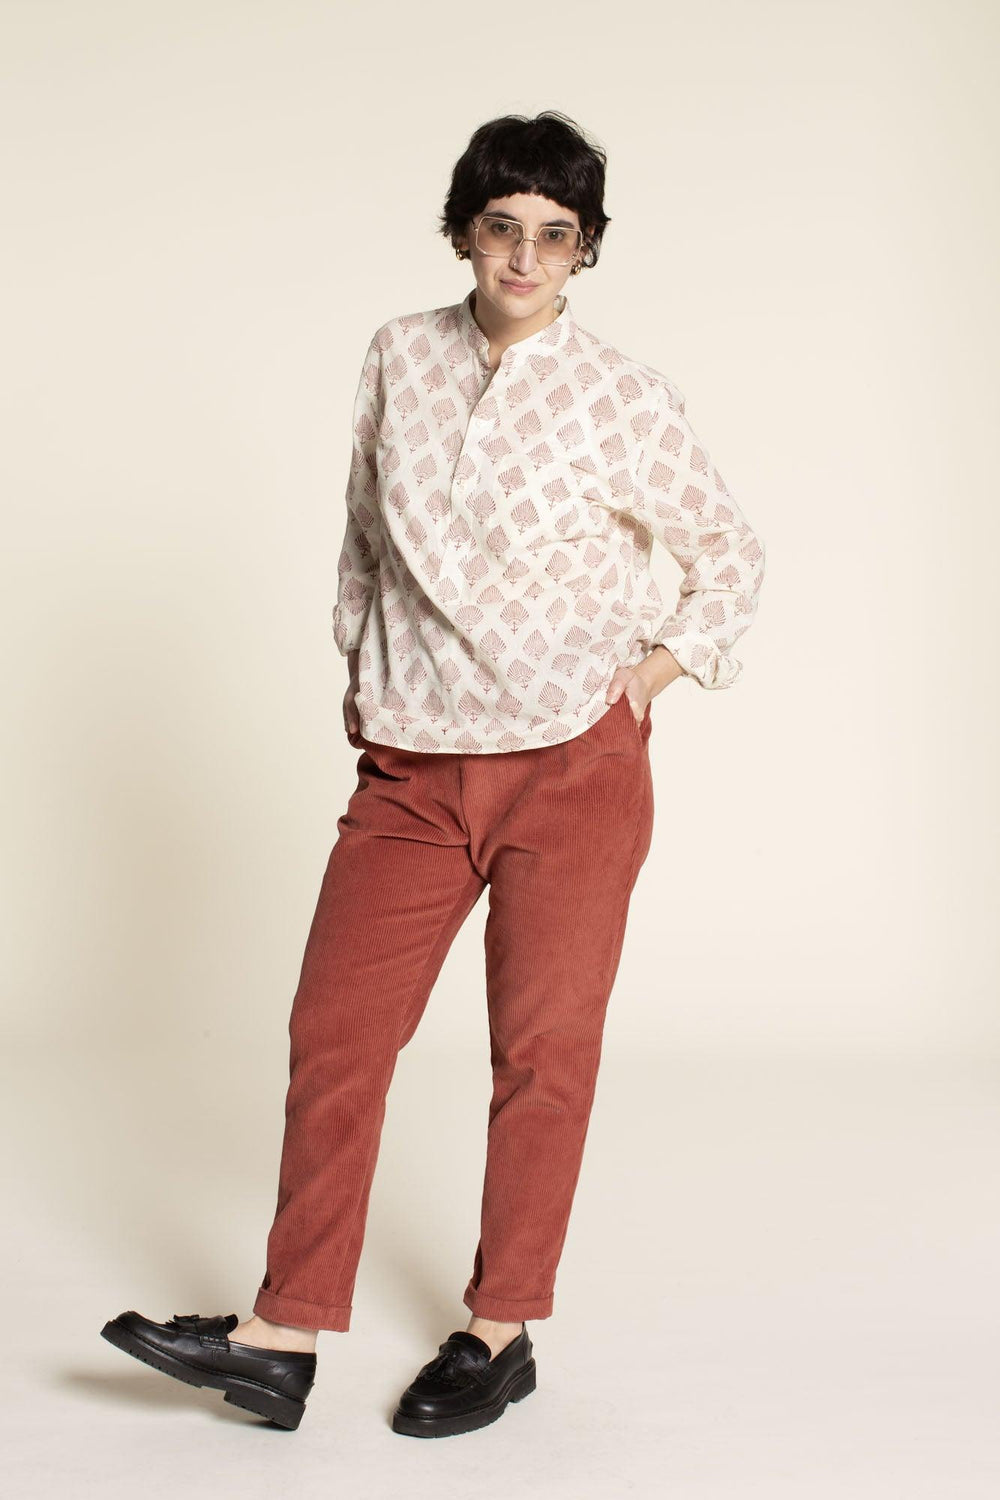 Woman wearing the Easy Pants sewing pattern from Wardrobe by Me on The Fold Line. A trouser pattern made in non-stretch cotton, linen, canvas or denim fabrics, featuring a relaxed fit, elastic waist, side pockets, back welt pockets, slim legs and cuffed h